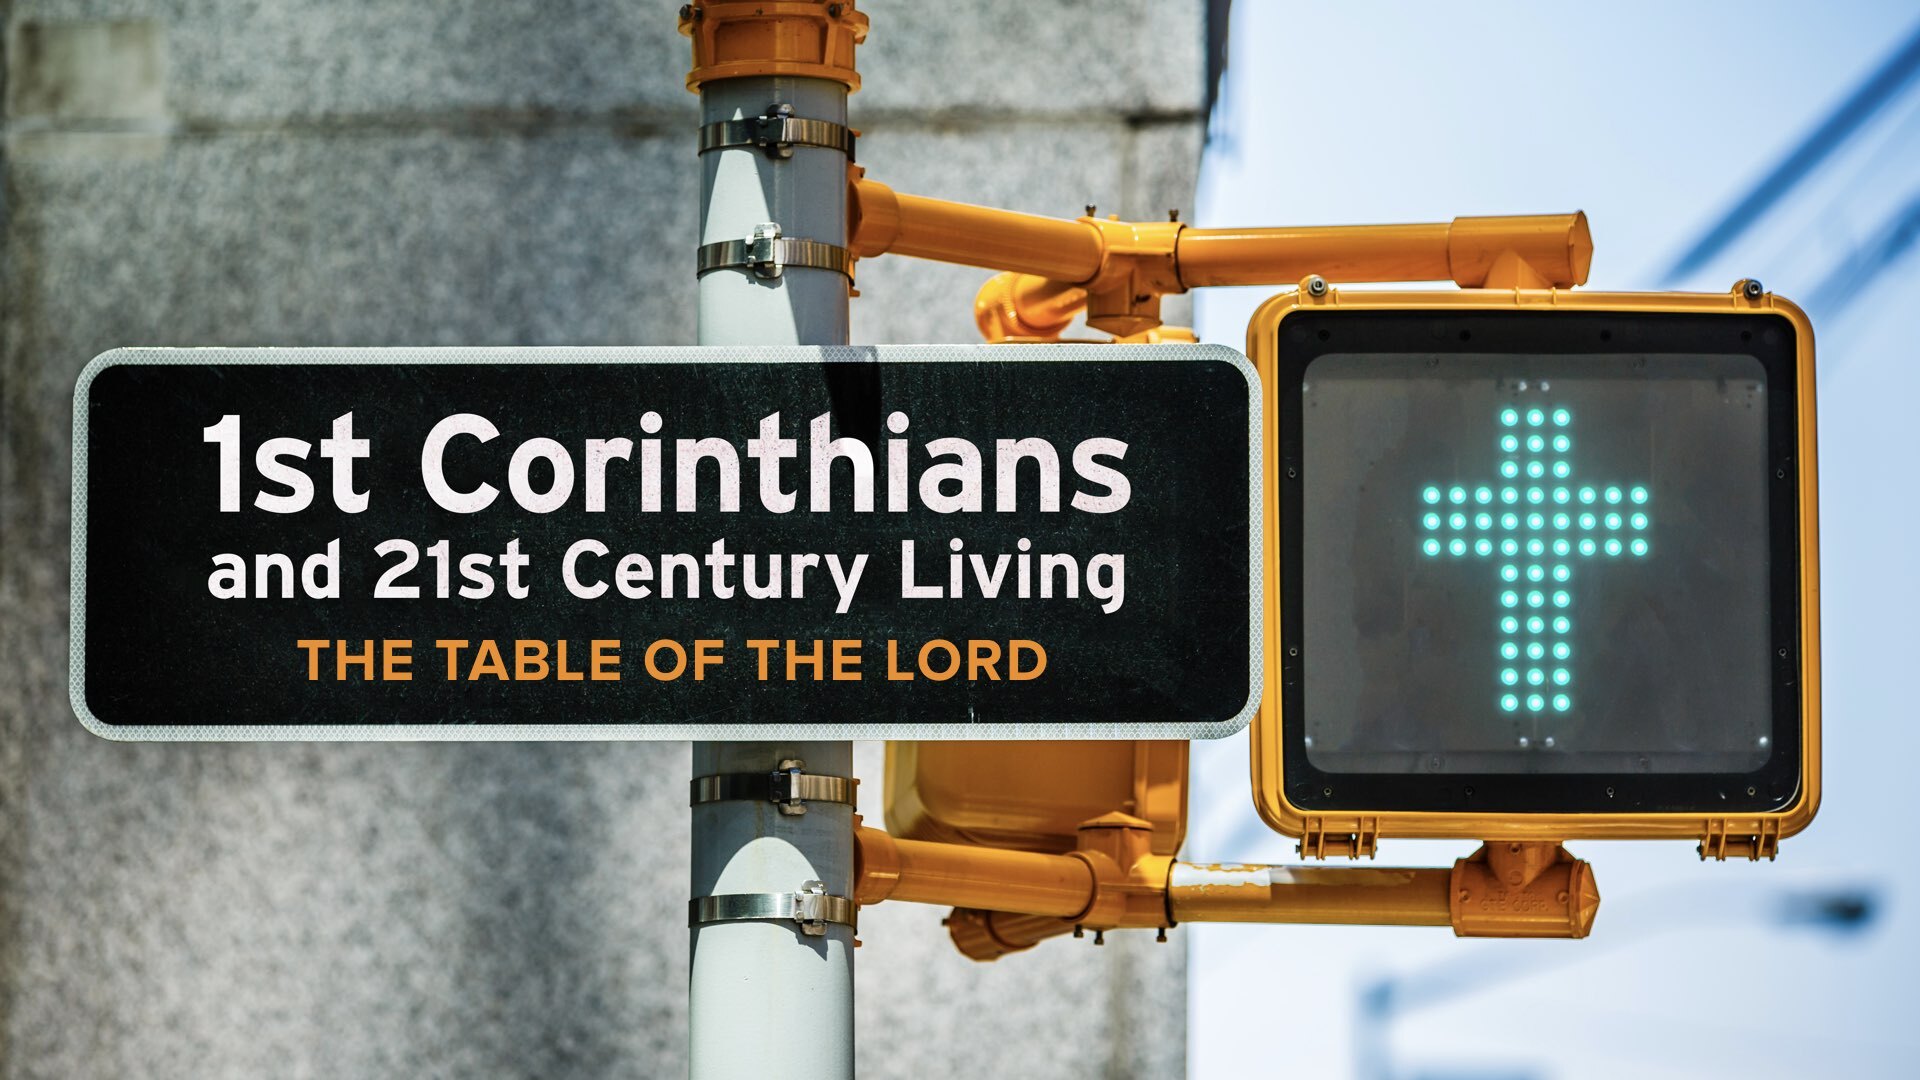 20191027_Podcast_Cover_-_1Cor_The_Table_of_the_Lord_001.jpeg